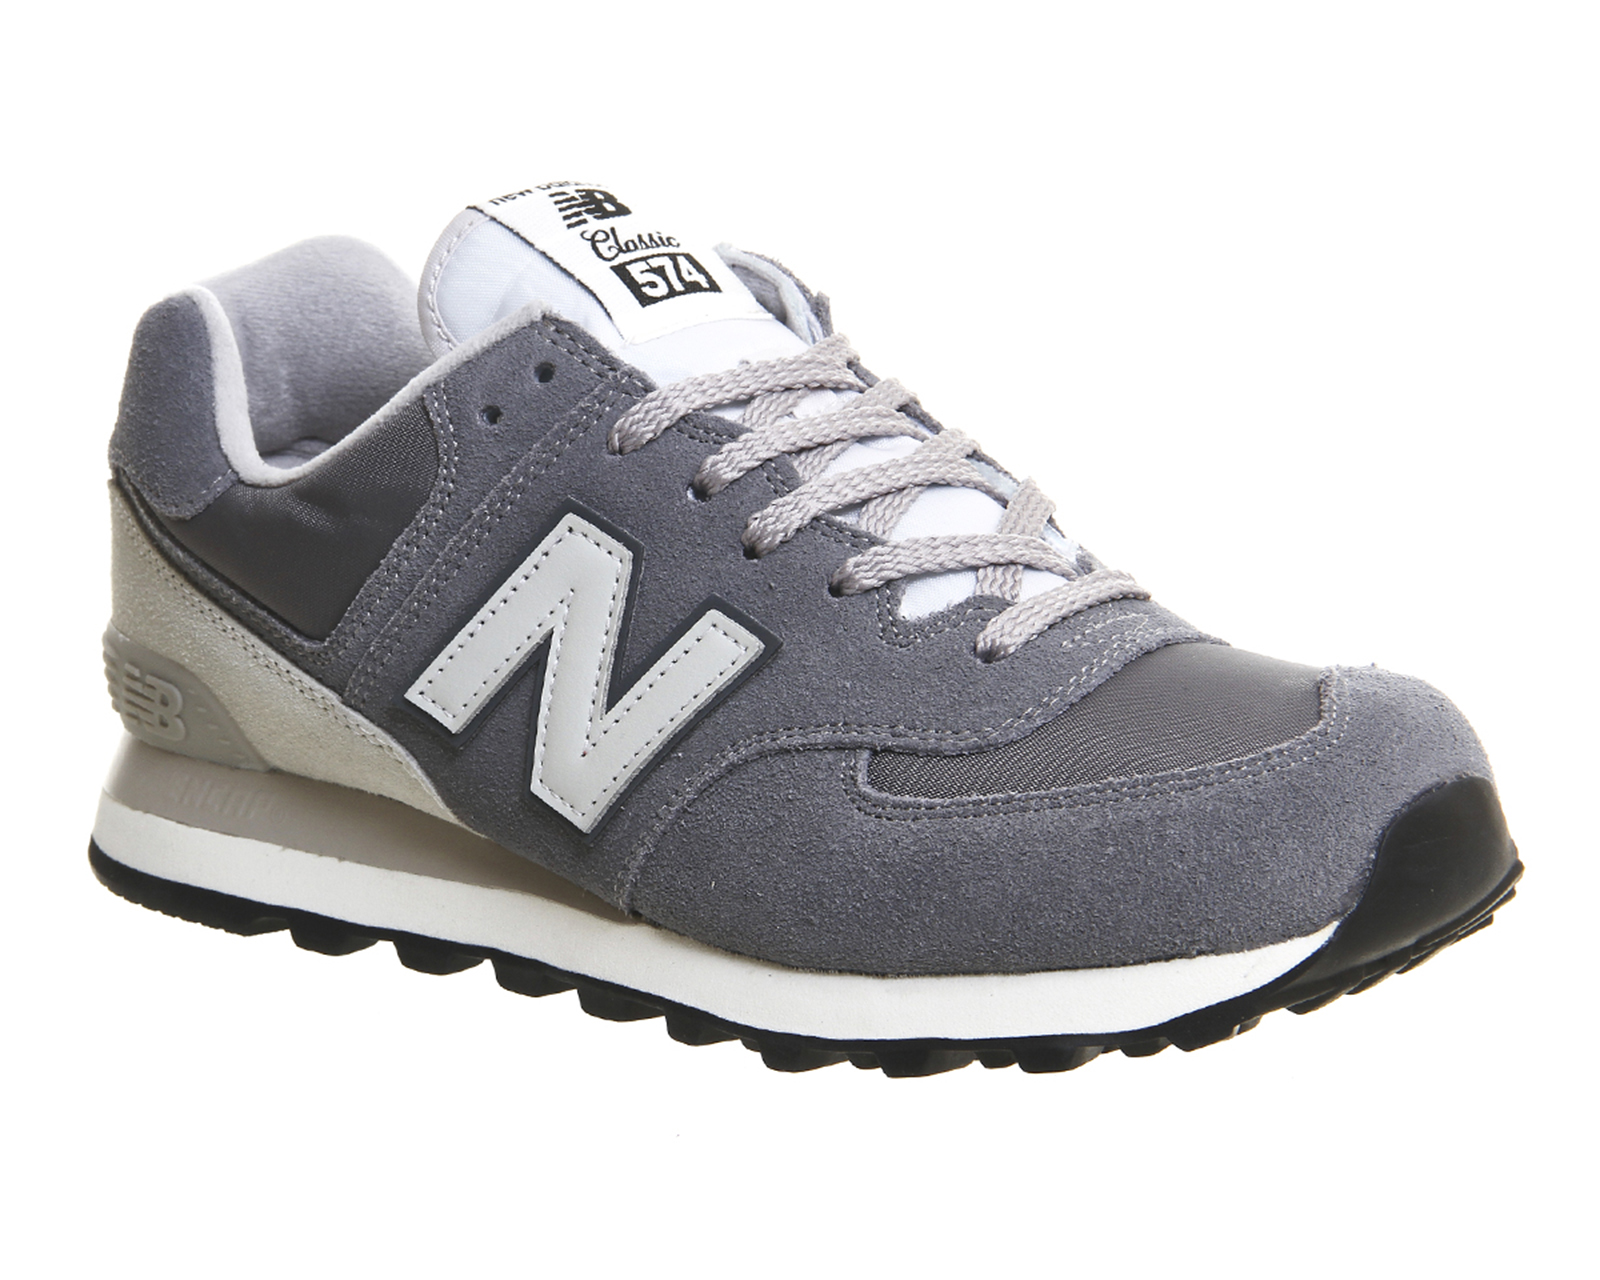 new balance sports trainers, OFF 79%,Buy!